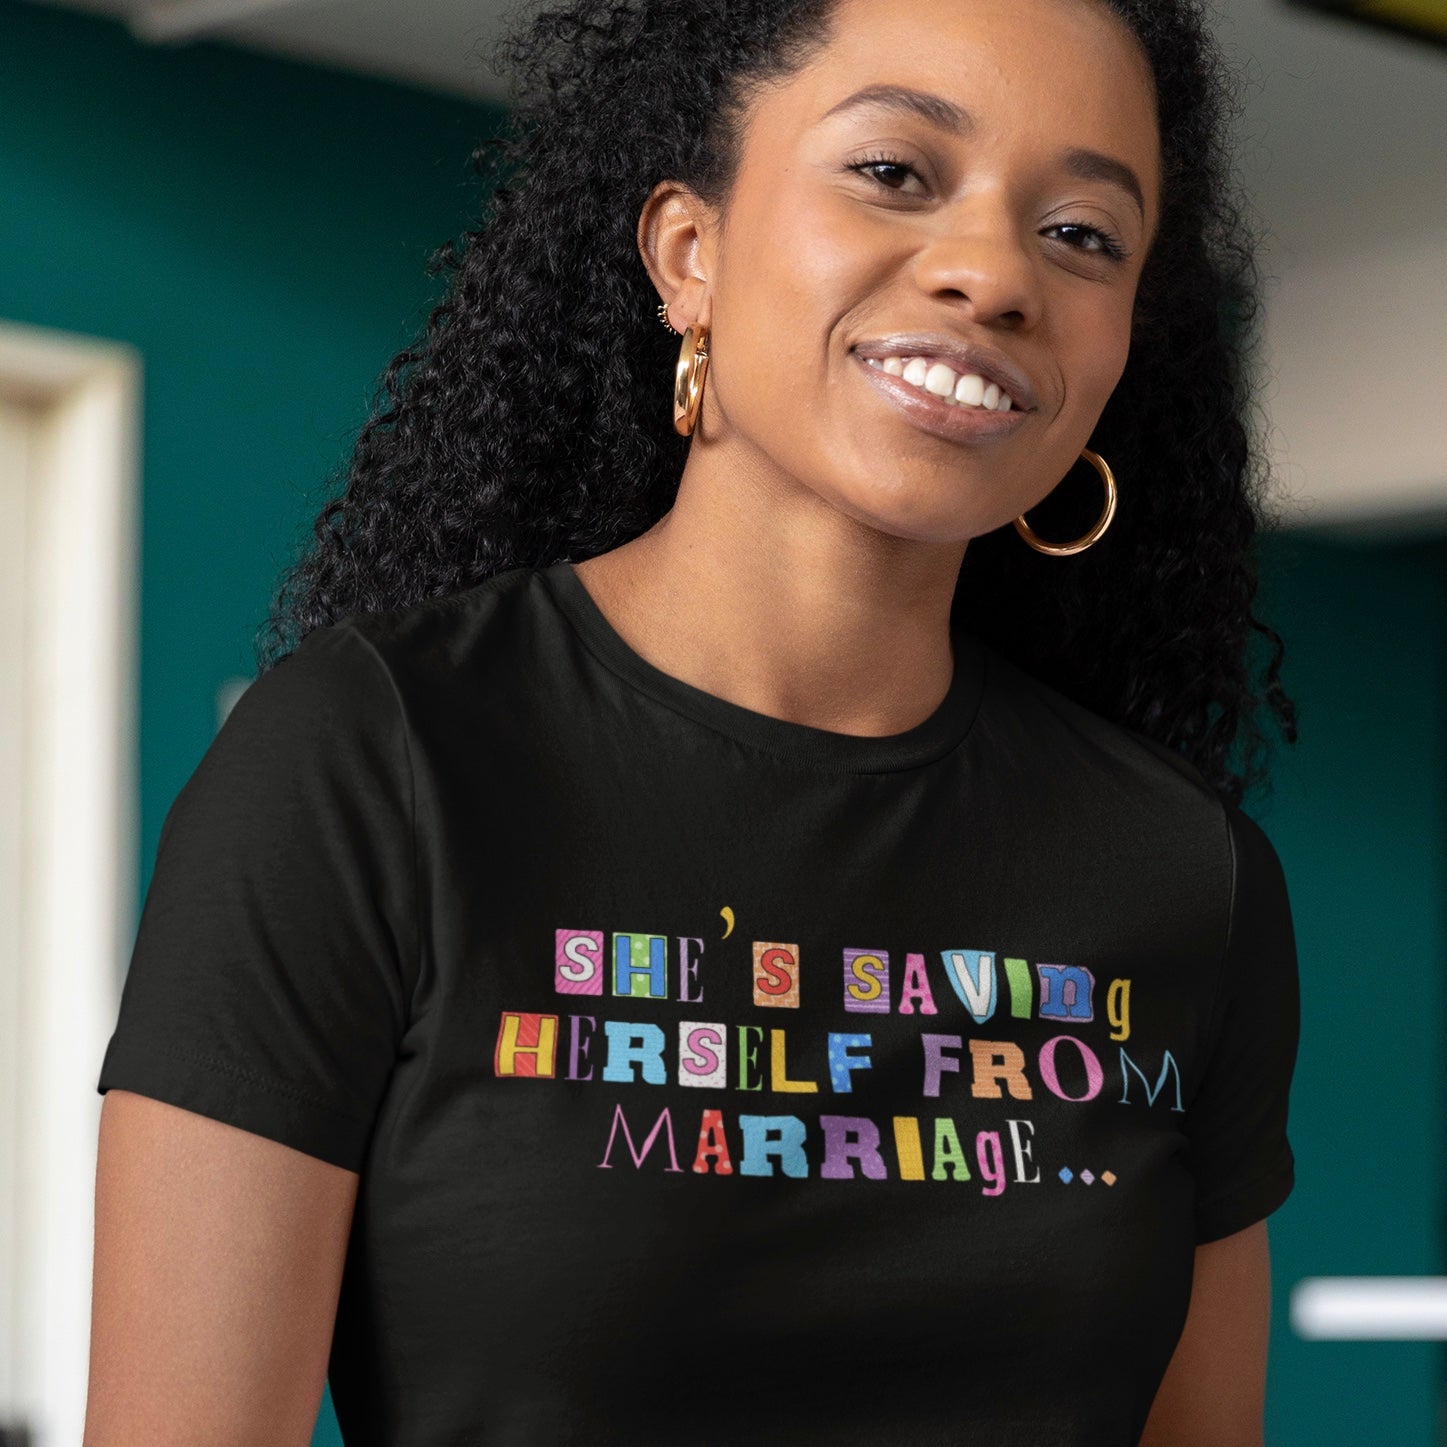 She's Saving Herself From Marriage Feminist T-shirt - Shop Women's Rights Shirts